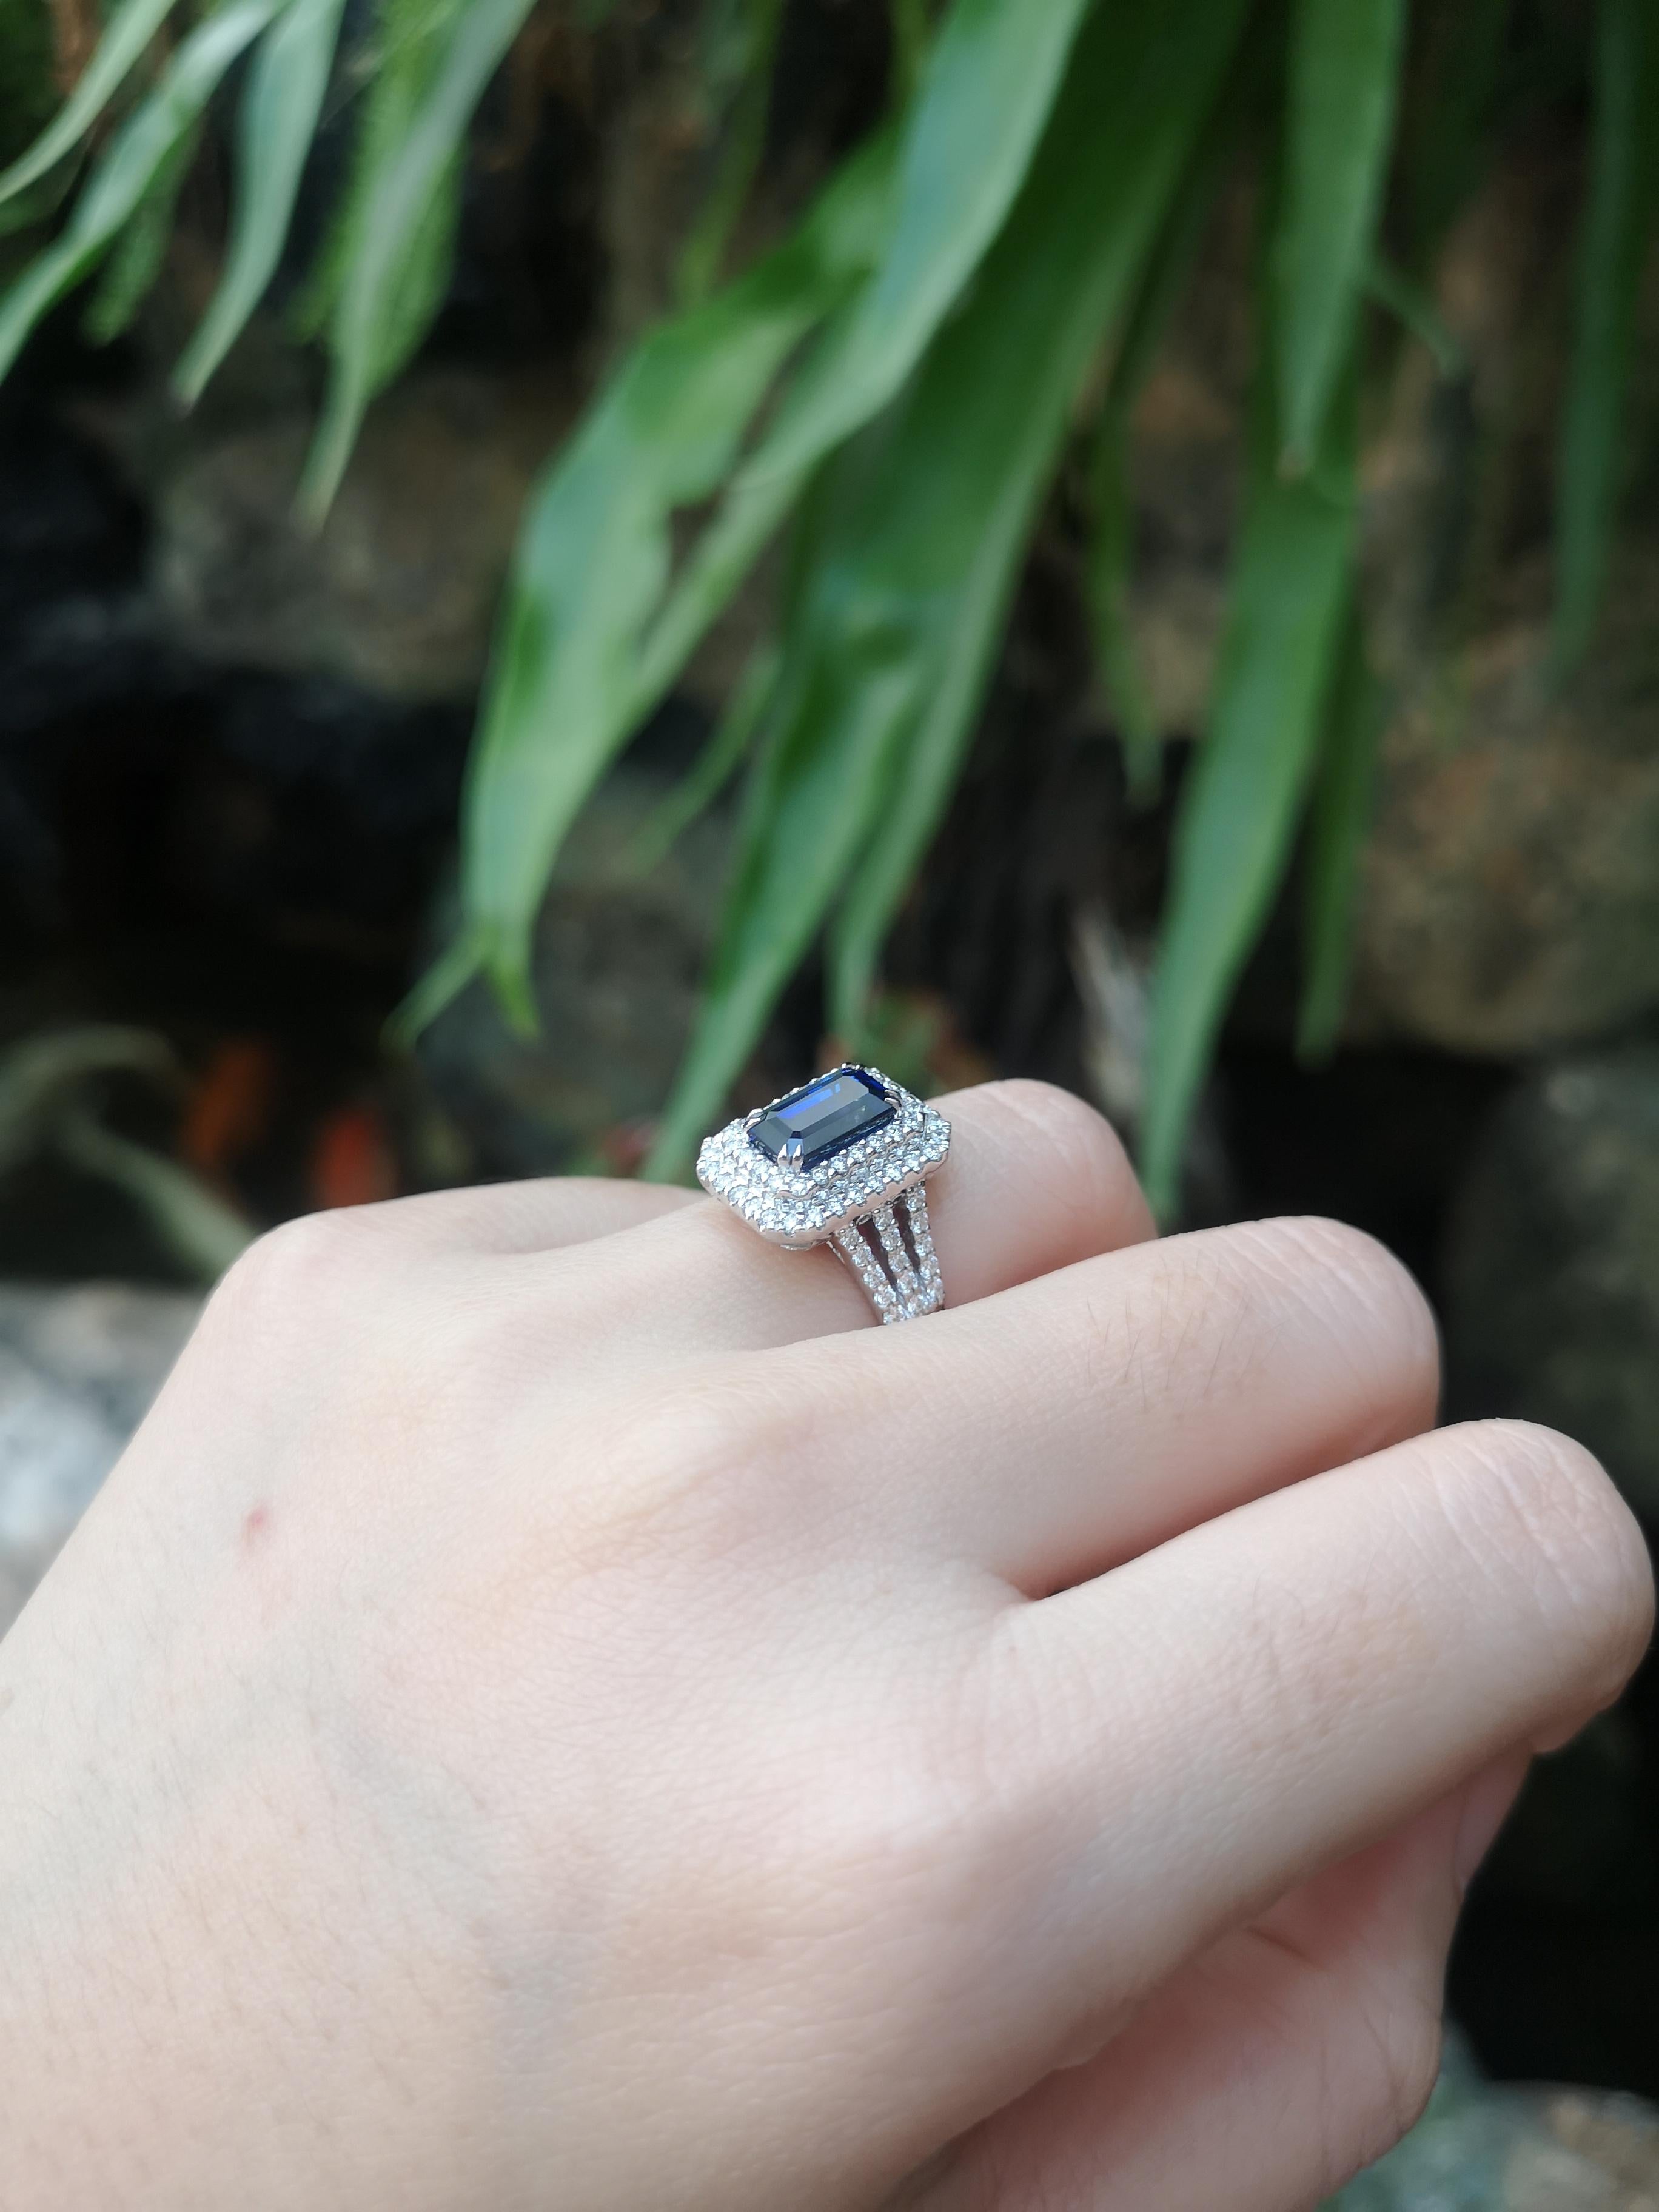 Emerald Cut GIA Certified 3 Cts Blue Sapphire with Diamond Ring Set in 18 Karat White Gold For Sale